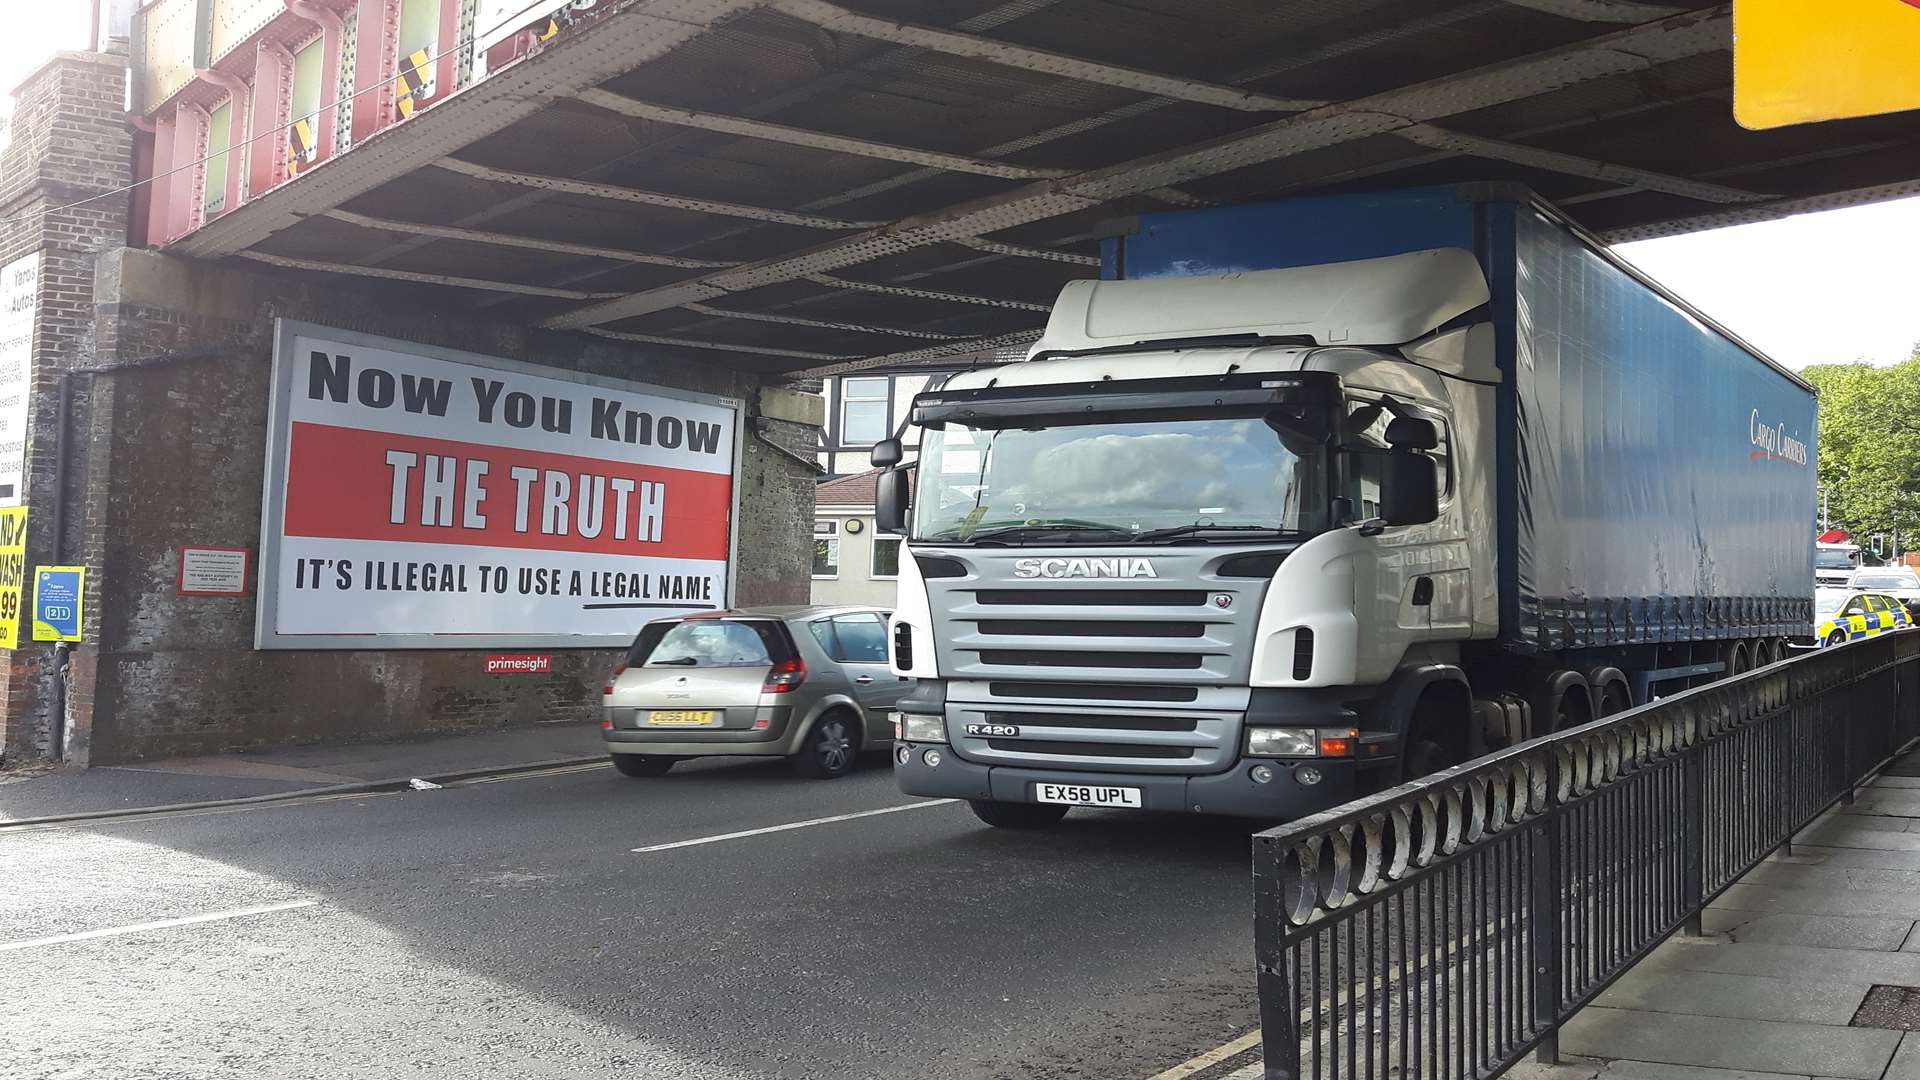 The lorry wedged under the bridge